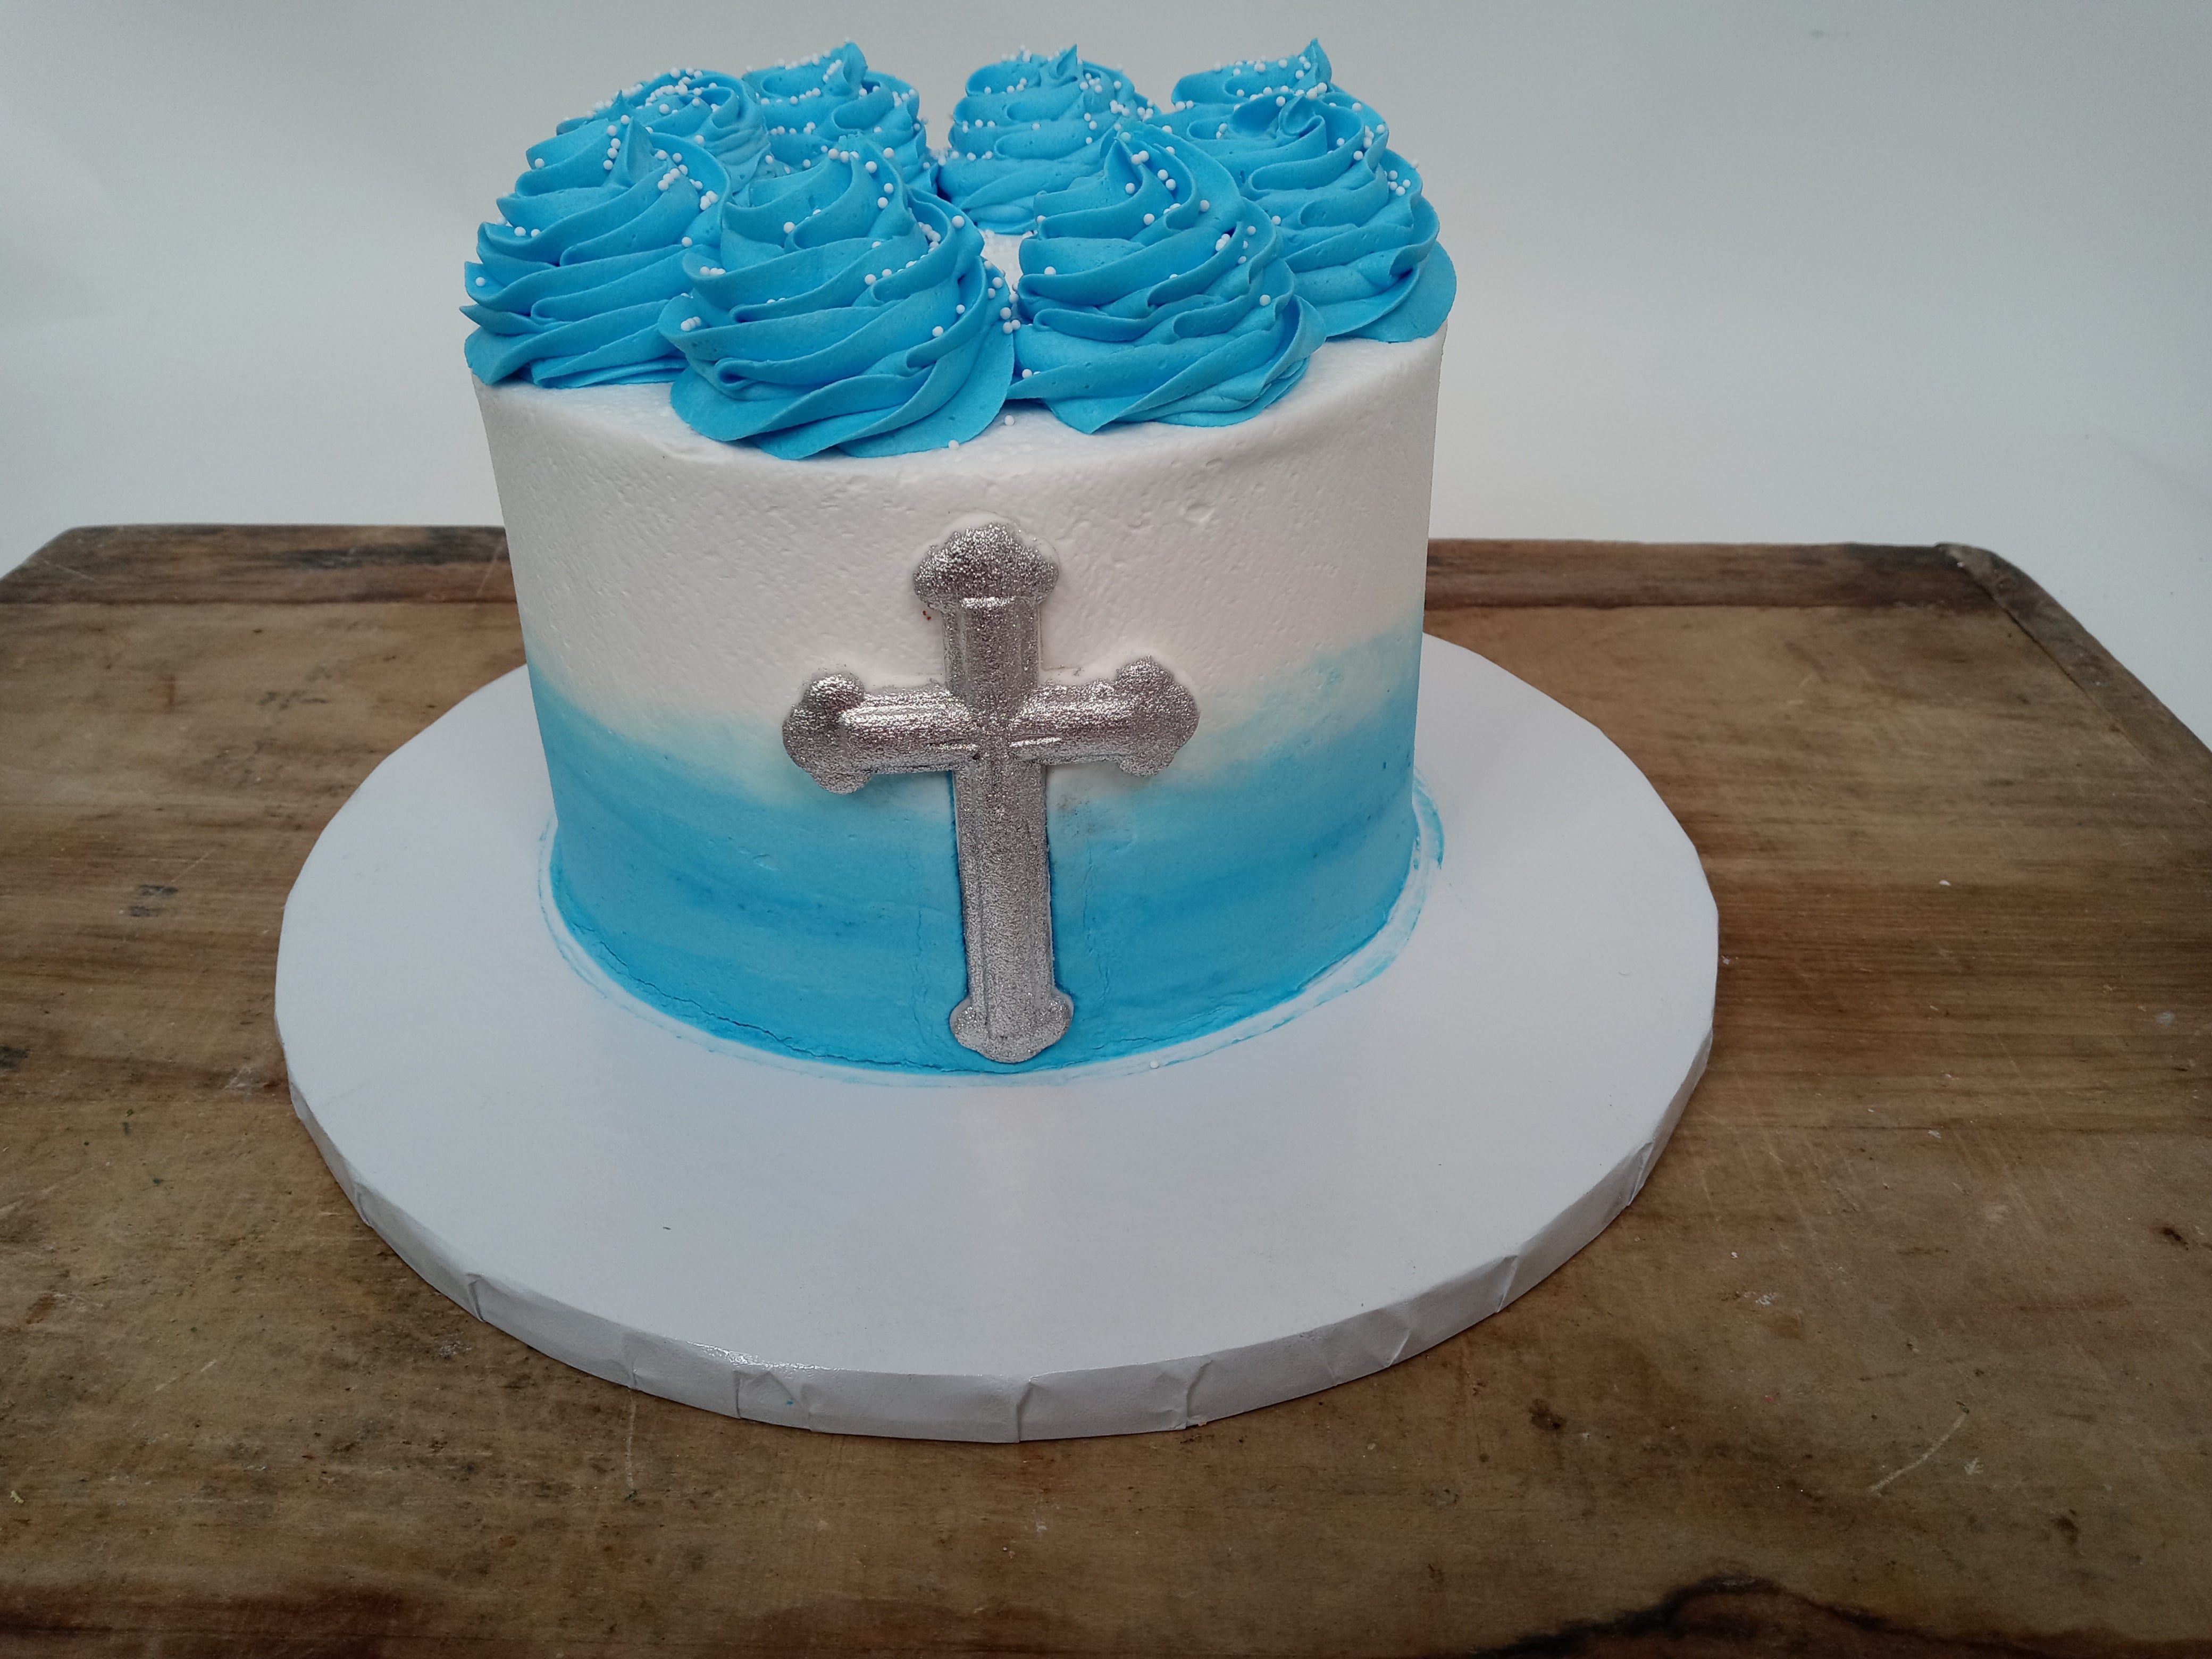 Holy Cross Cake Topper Australia - Slimline - Buy Religious Crucifix Cake  Topper or Cake Decoration Online With AfterPay, PayPal or Card